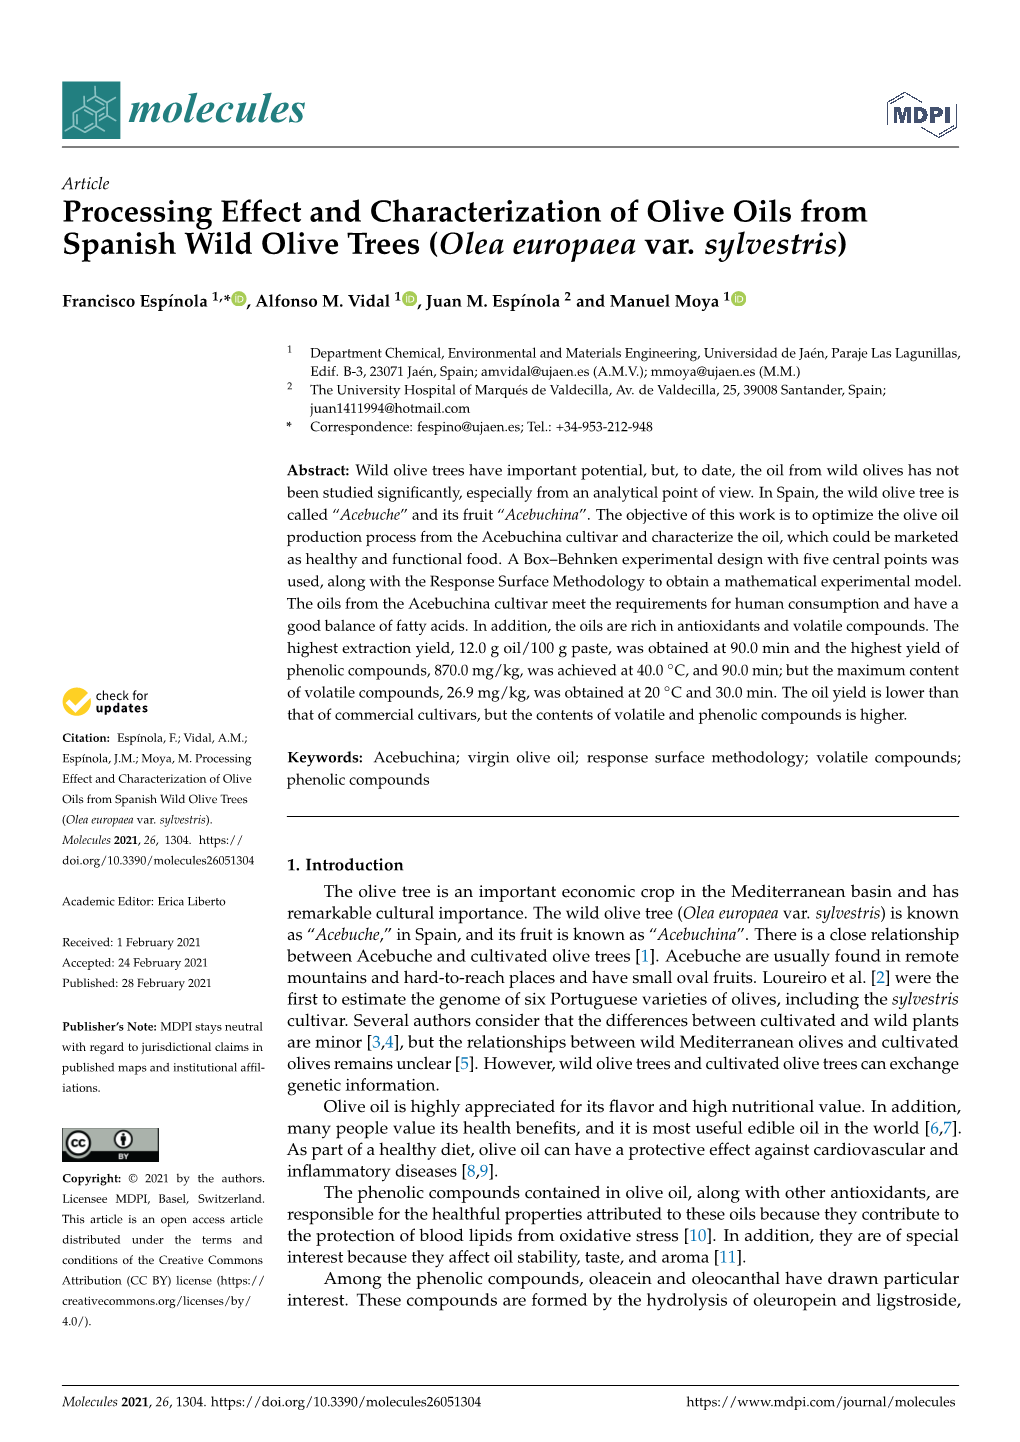 Processing Effect and Characterization of Olive Oils from Spanish Wild Olive Trees (Olea Europaea Var